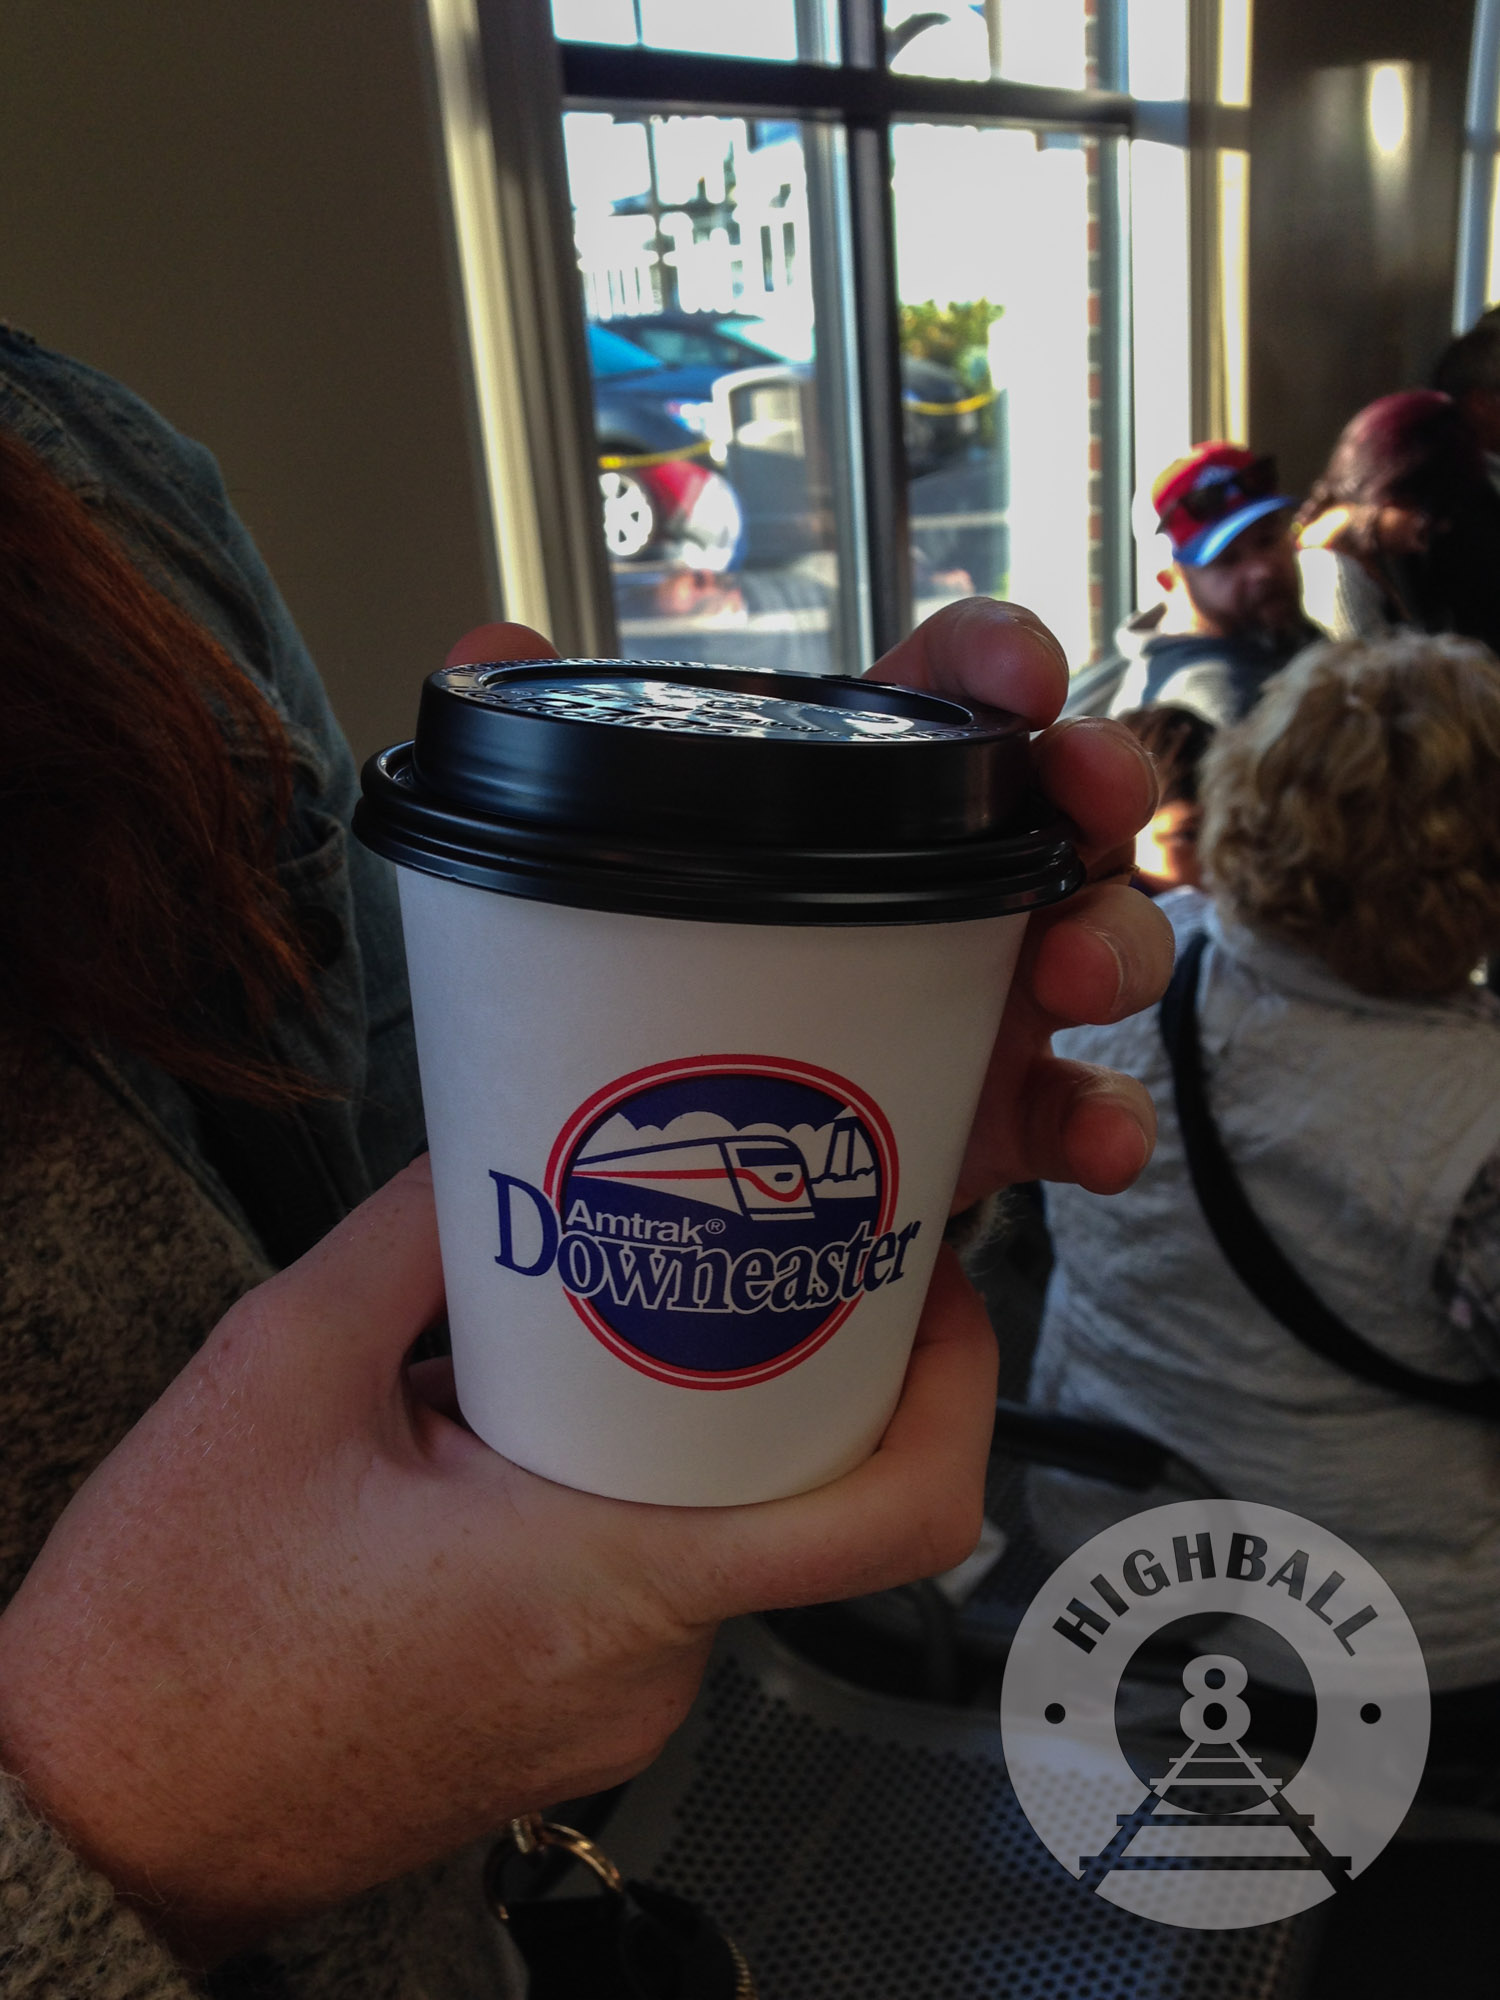 The Amtrak Downeaster has its own coffee cups! Portland, Maine, USA, 2014.